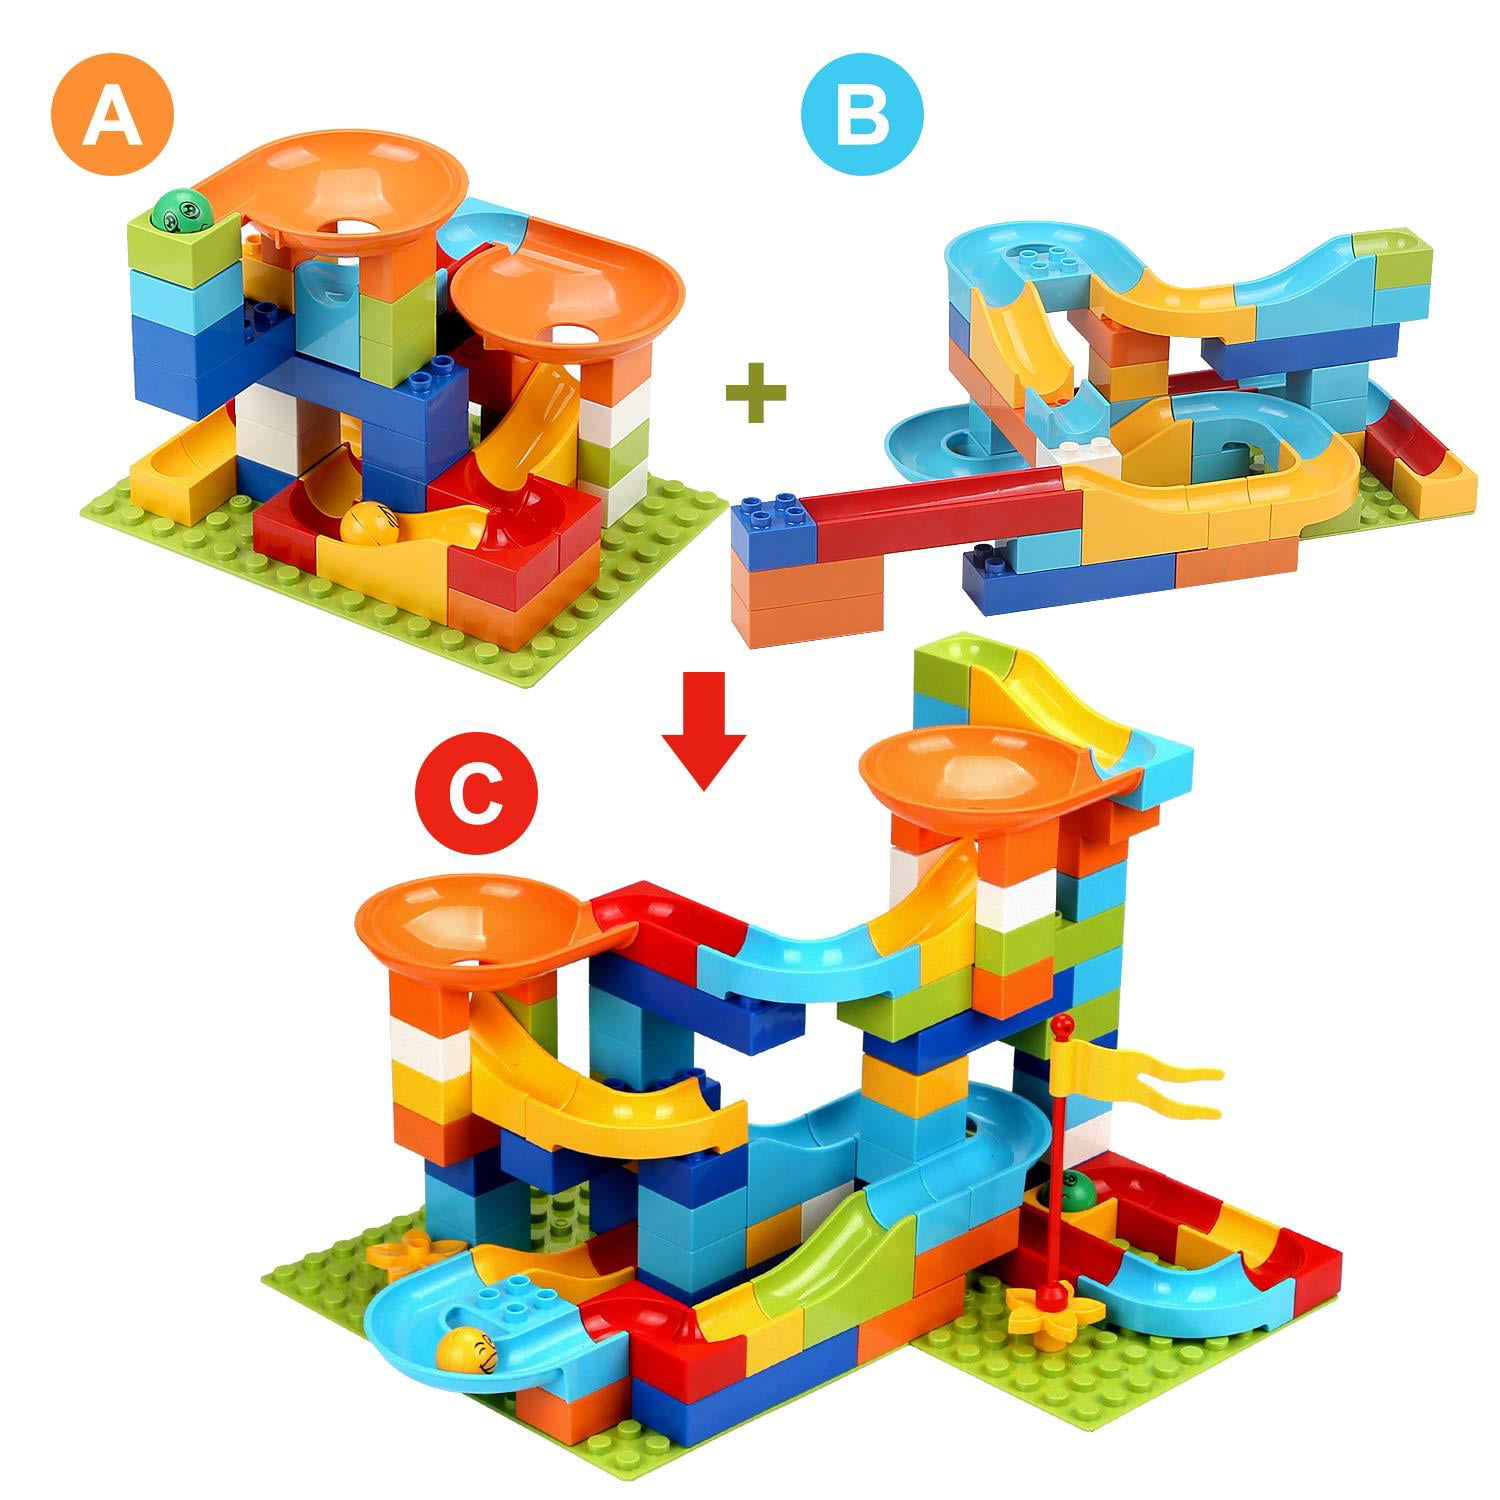 Marble Run Building Blocks Gear Toys Classic Big Blocks STEM Toy Bricks Set Kids Race Track Compatible with All Major Brands 139 PCS Various Track Models for Boys Girls Toddler Age 3,4,5,6,7,8+ 